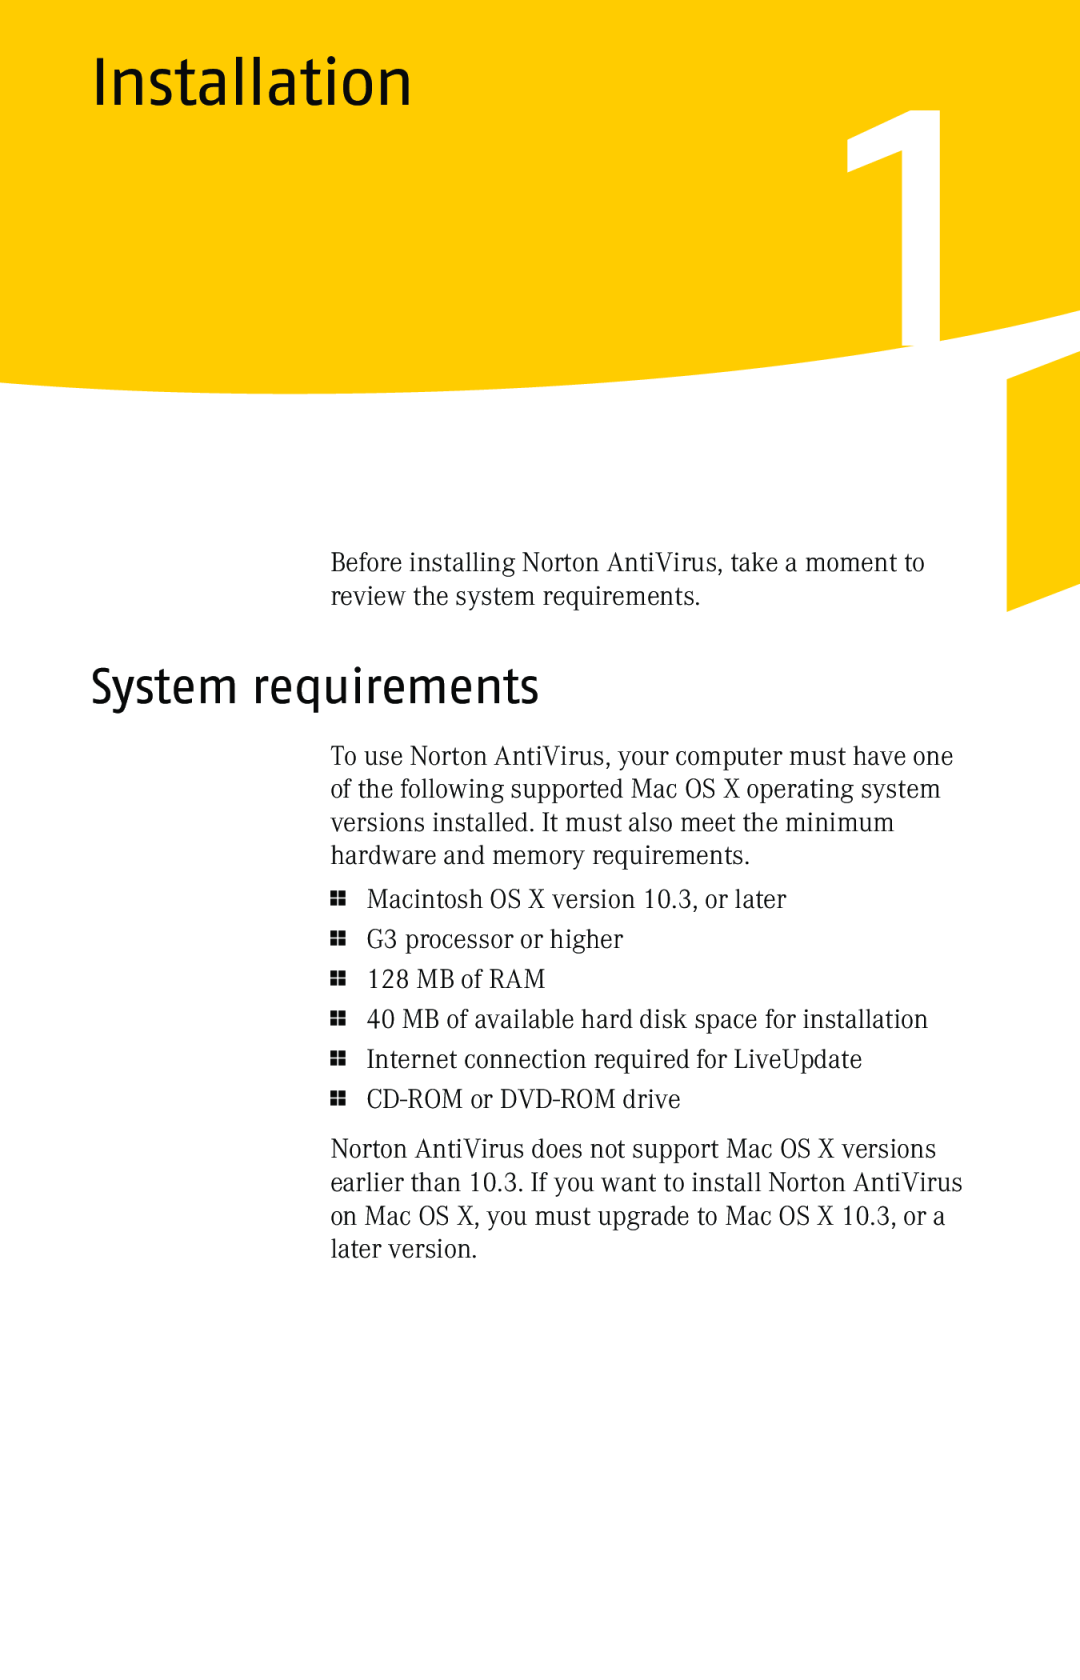 Symantec 10 manual Installation1, System requirements 